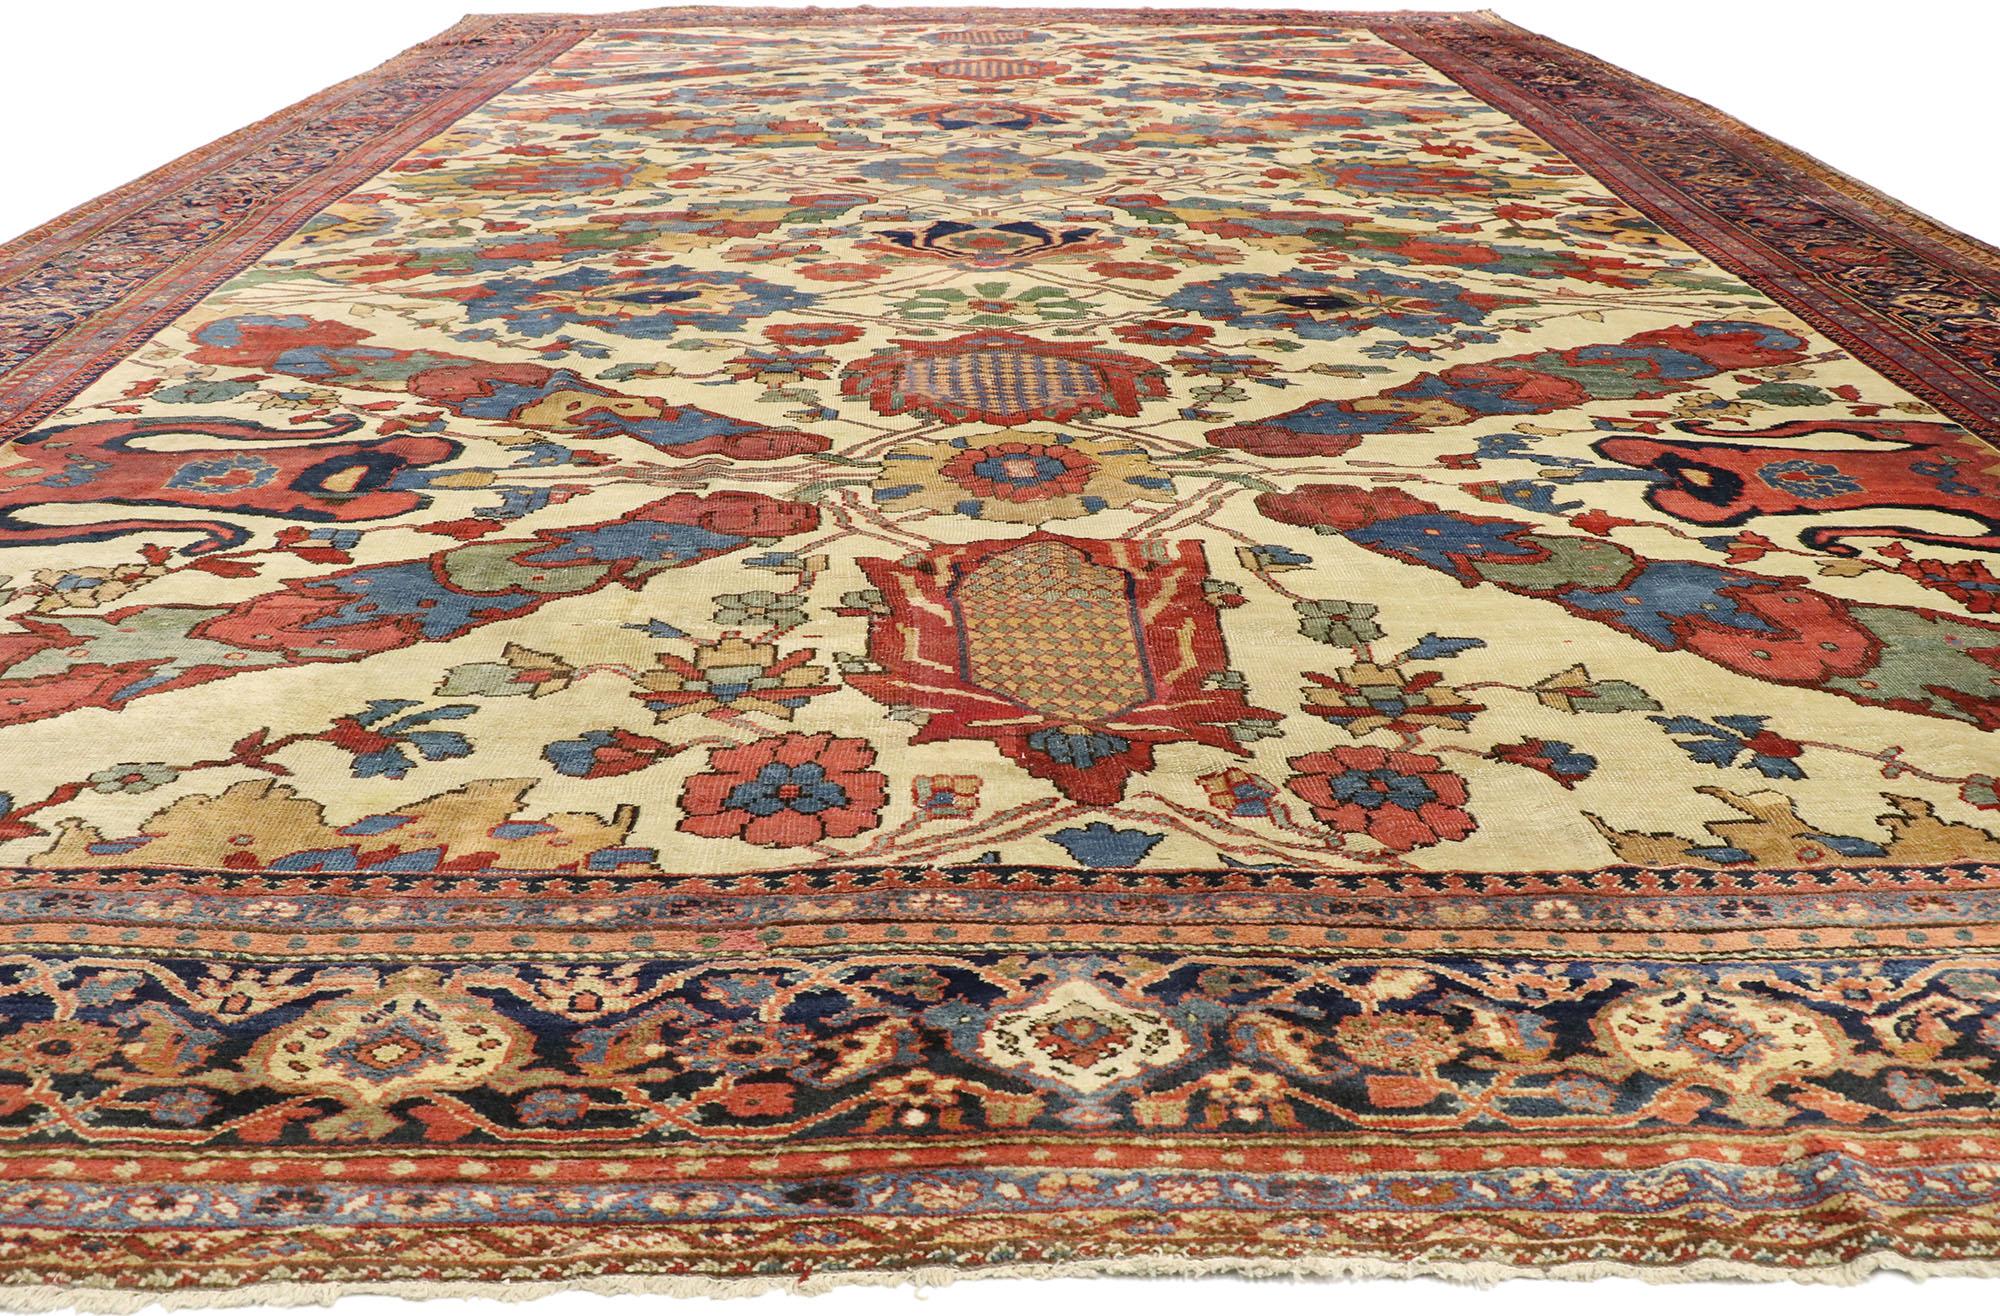 Arts and Crafts 1880s Antique Persian Ziegler Mahal Sultanabad Rug, Hotel Lobby Size Carpet For Sale